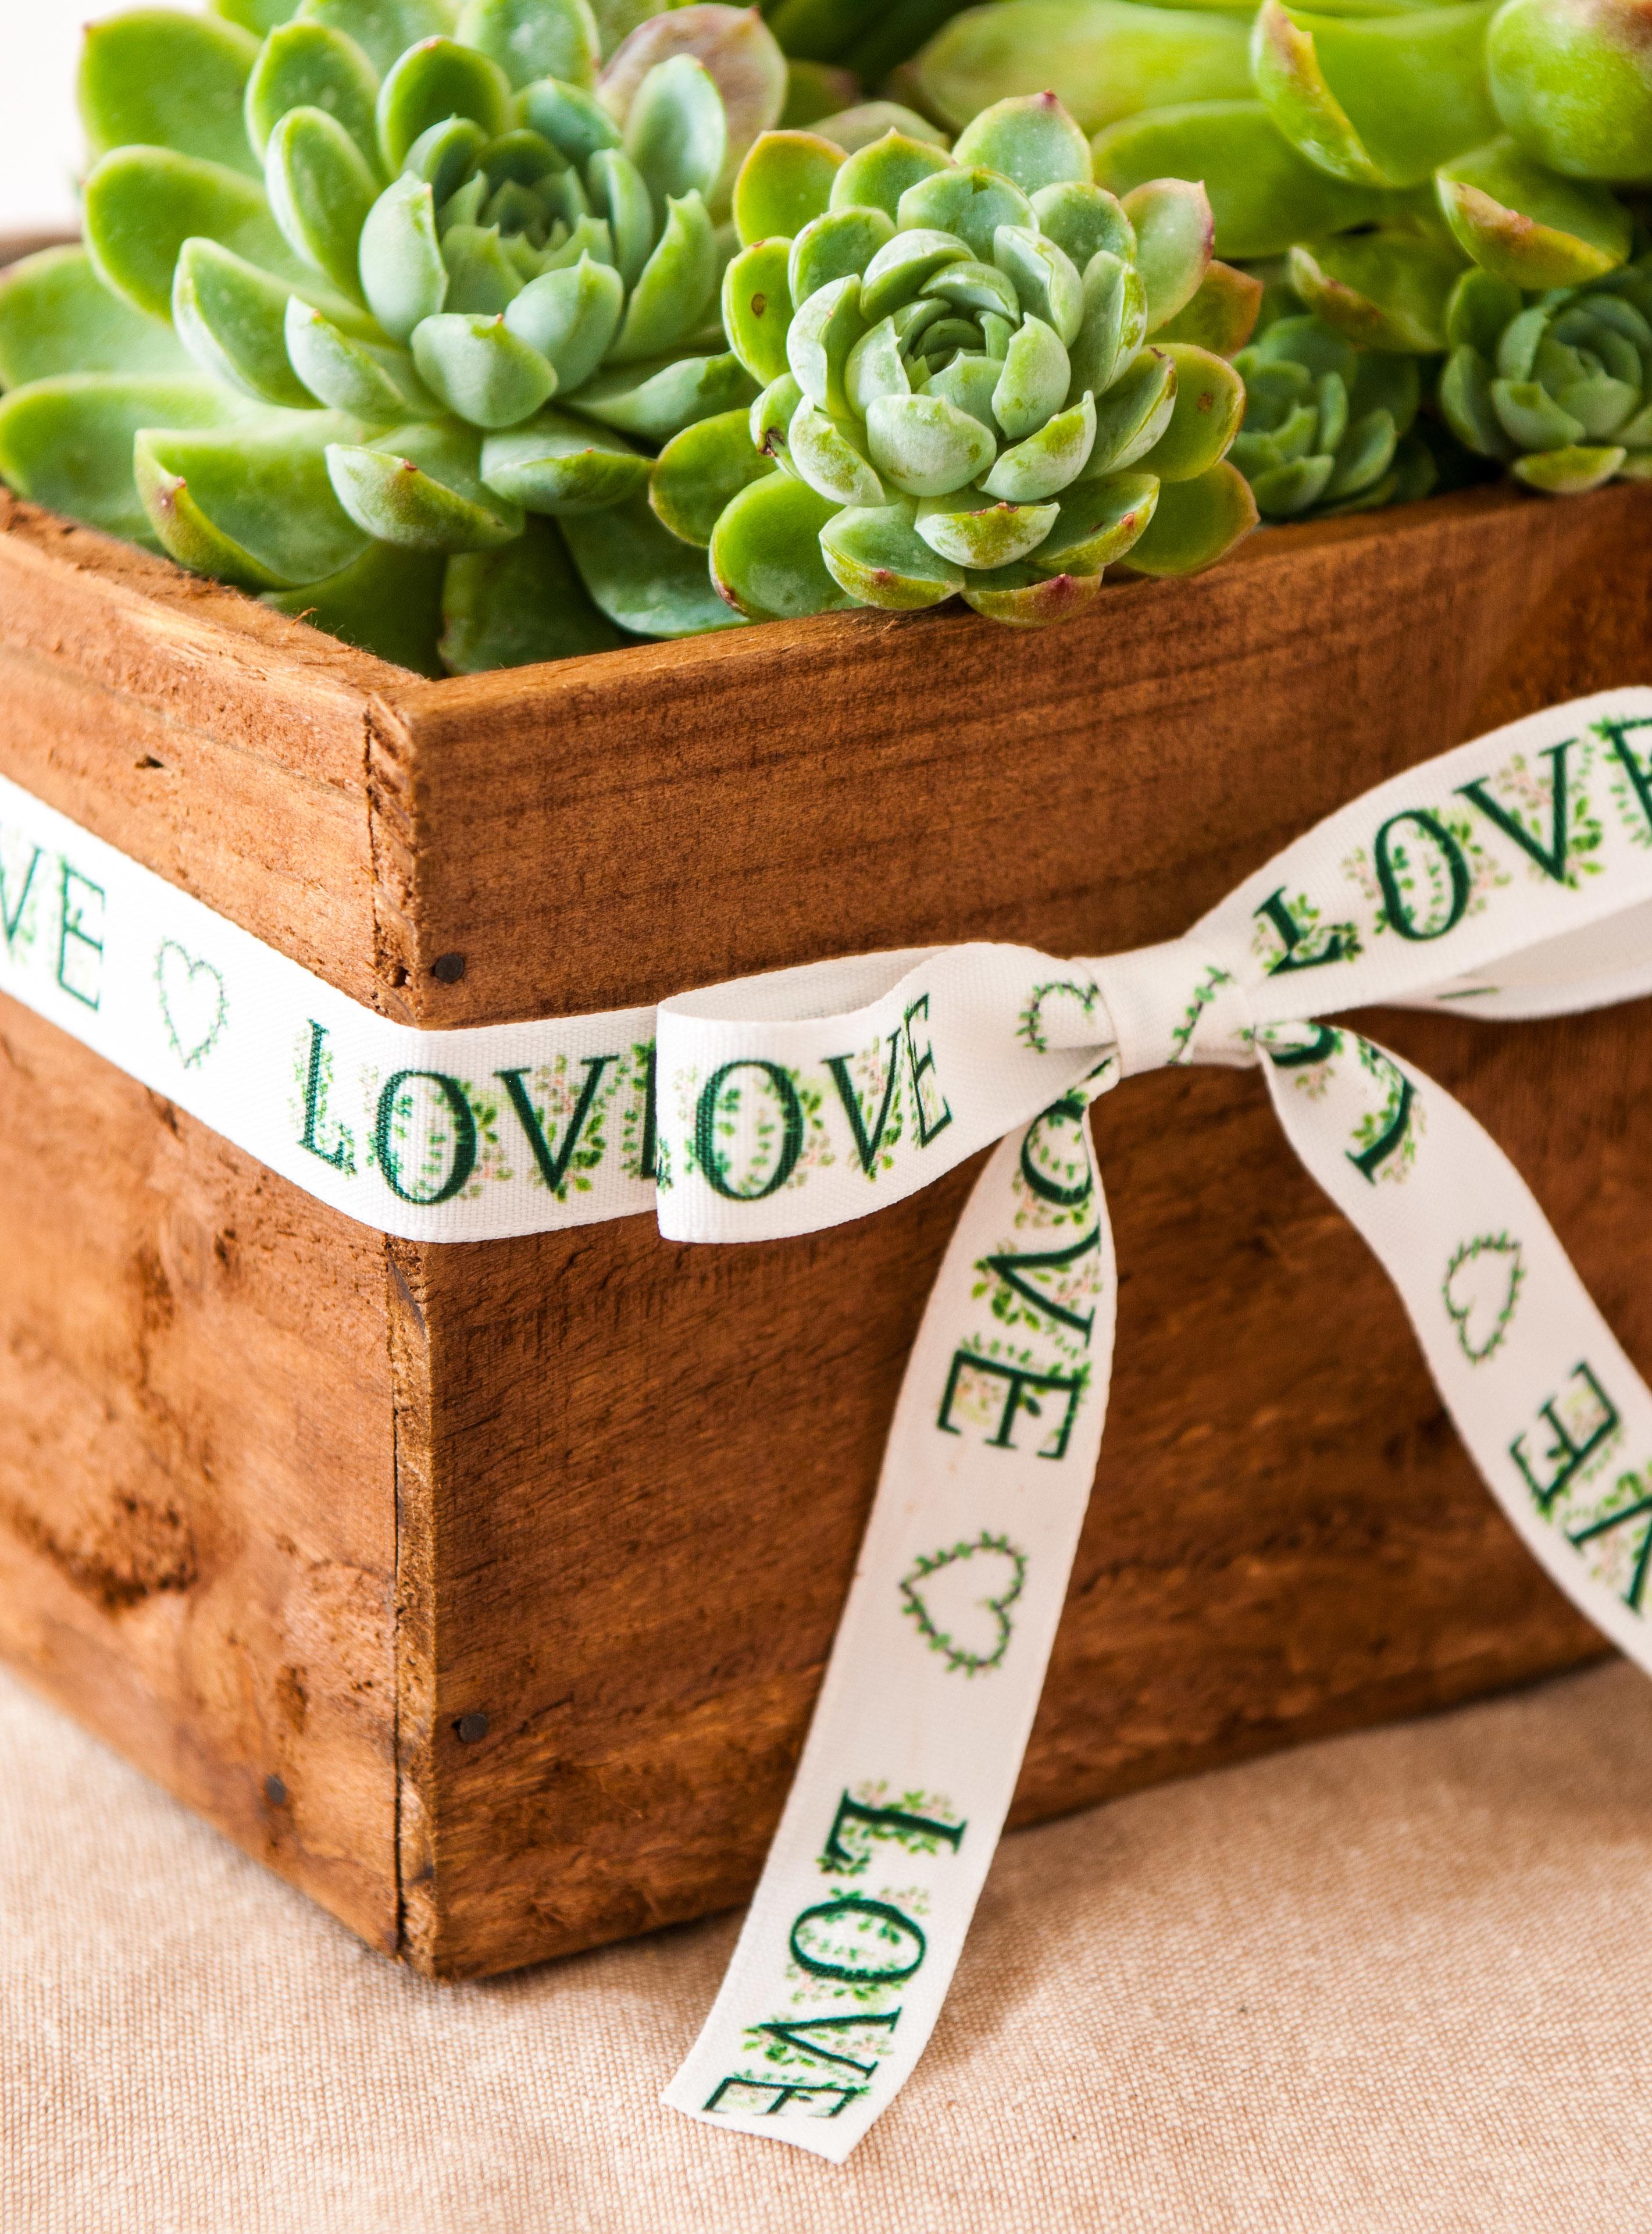 White ribbon with Green Love wording and floral pattern tied in a bow around a wooden plant holder.